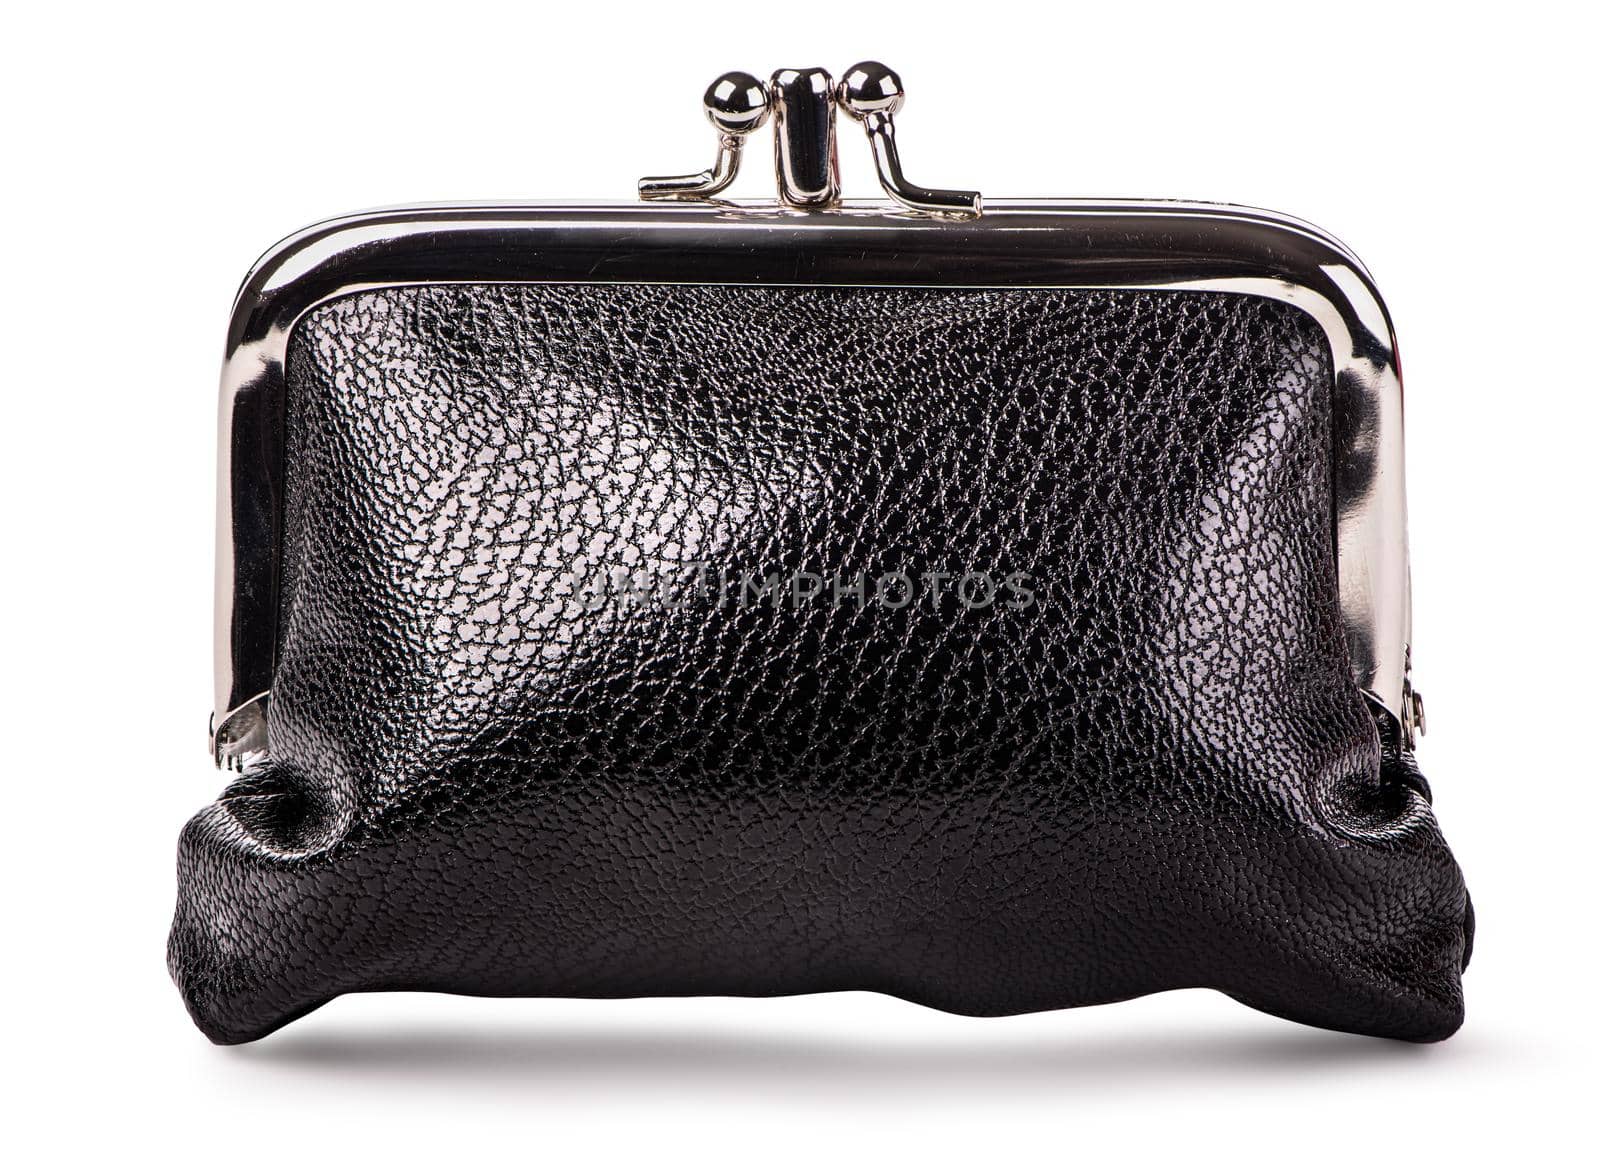 Black leather purse by Givaga